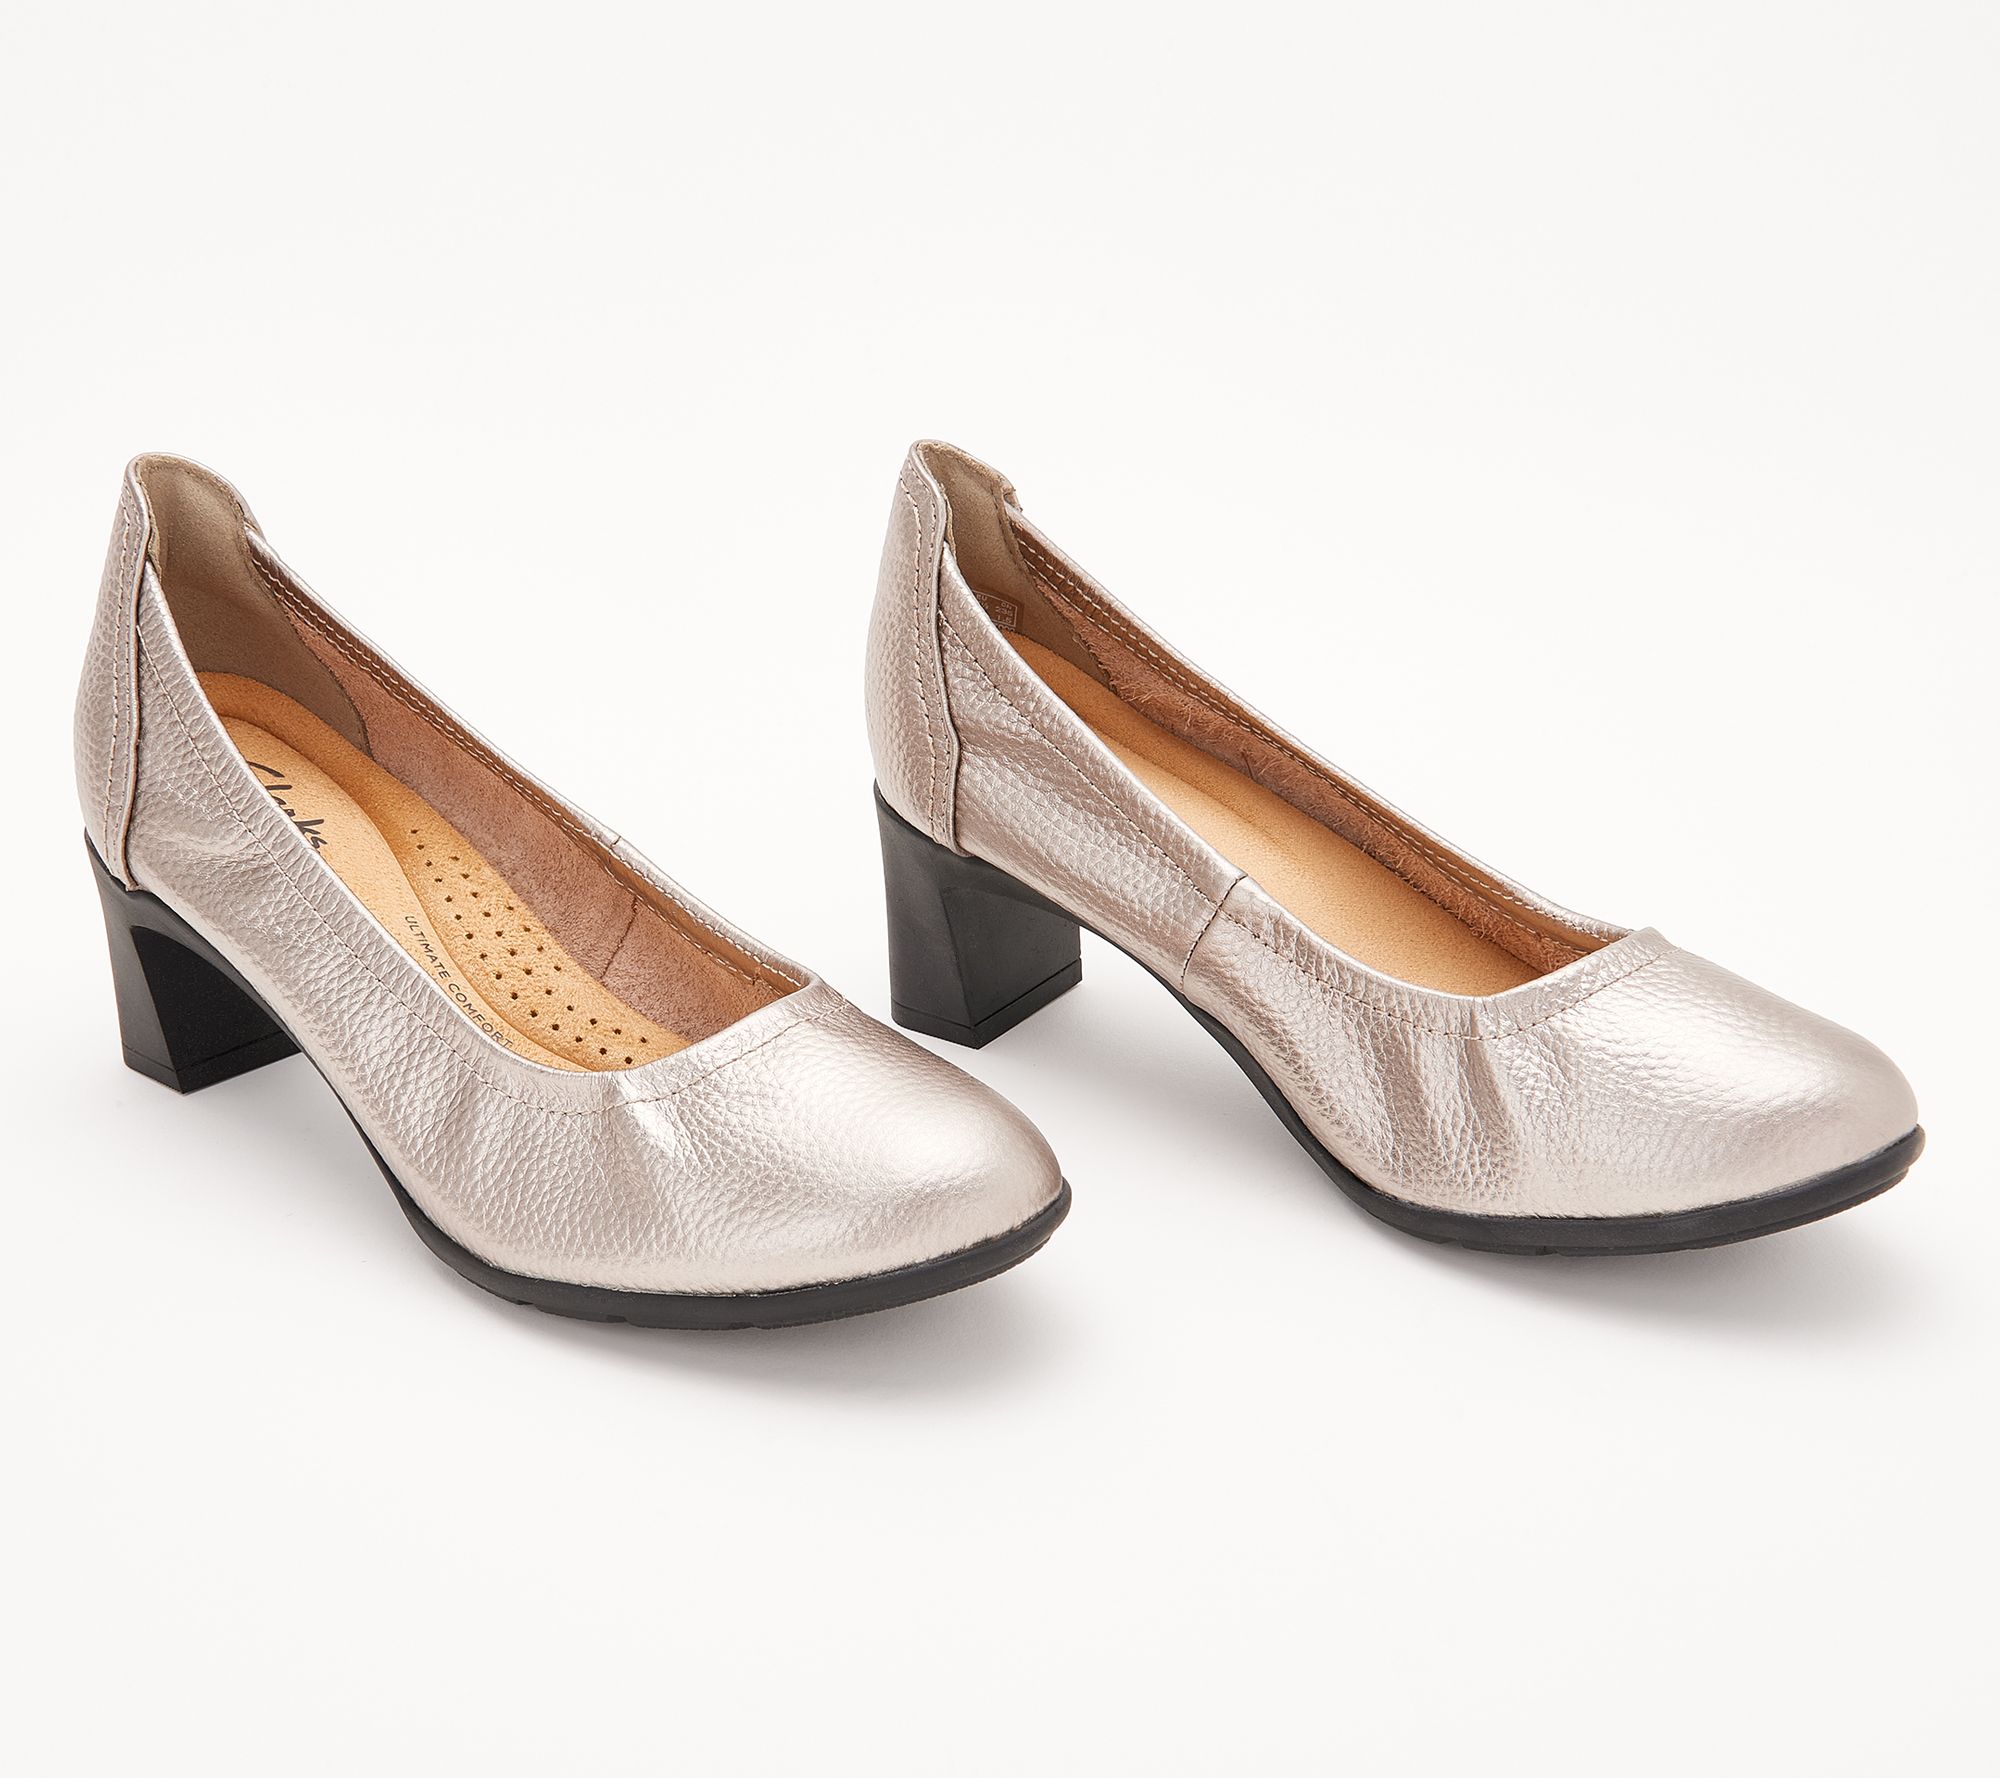 Clarks Leather Pumps Neiley Pearl - QVC.com